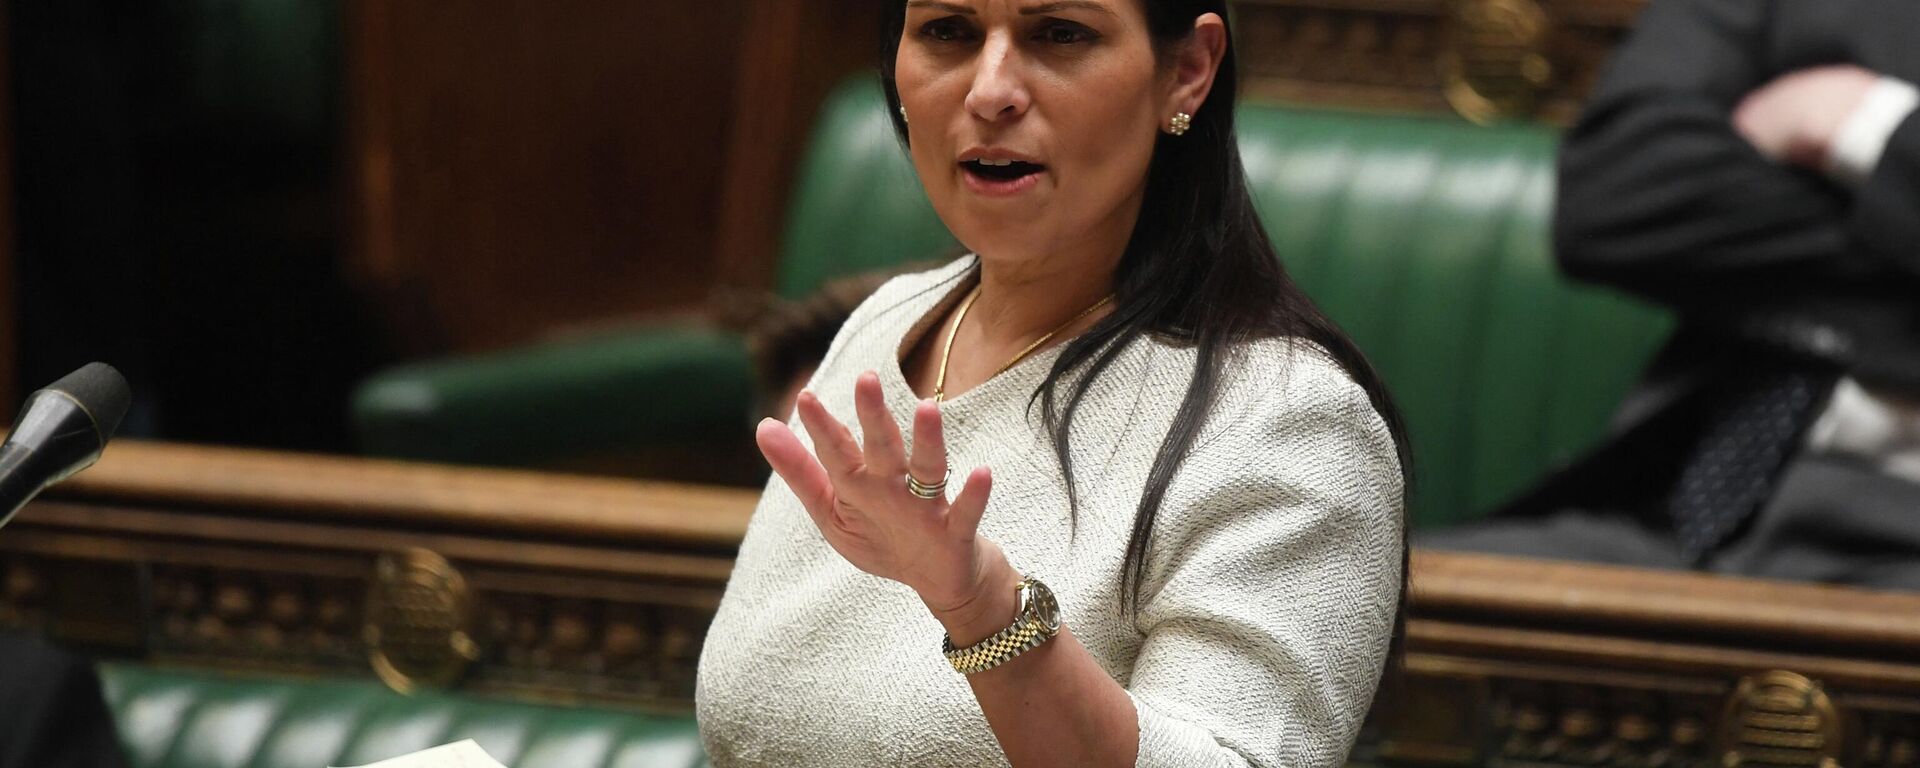 A handout photograph released by the UK Parliament shows Britain's Home Secretary Priti Patel gesturing as she gives a statement concerning the deal plan to send migrants and asylum seekers who cross the Channel to Rwanda, at the House of Commons, in London, on April 19, 2022 - Sputnik International, 1920, 15.06.2022